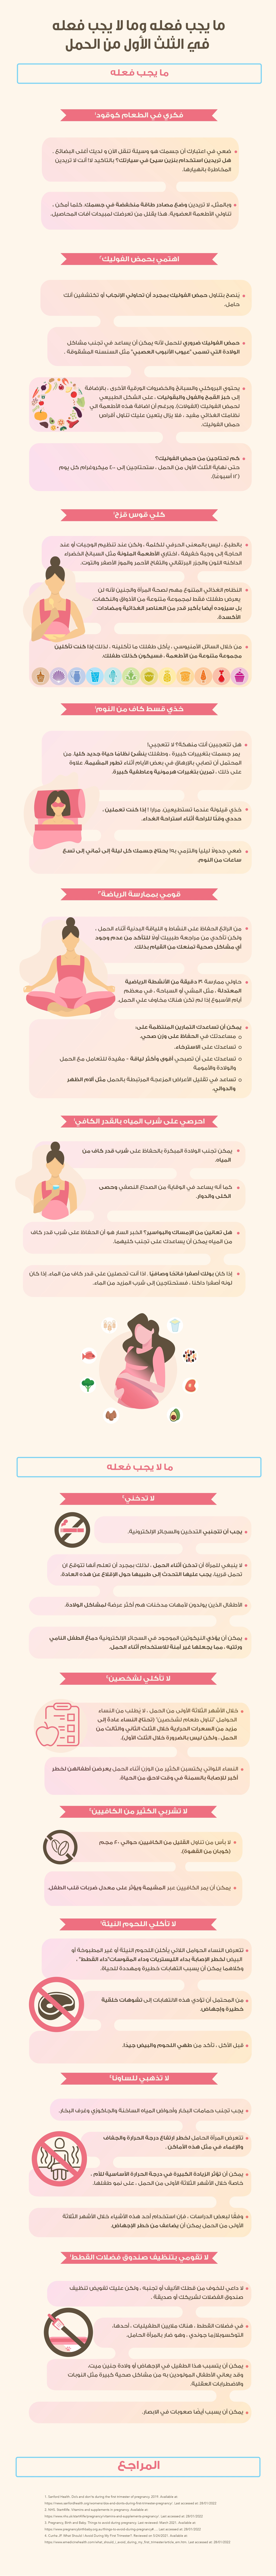 First trimester infographic